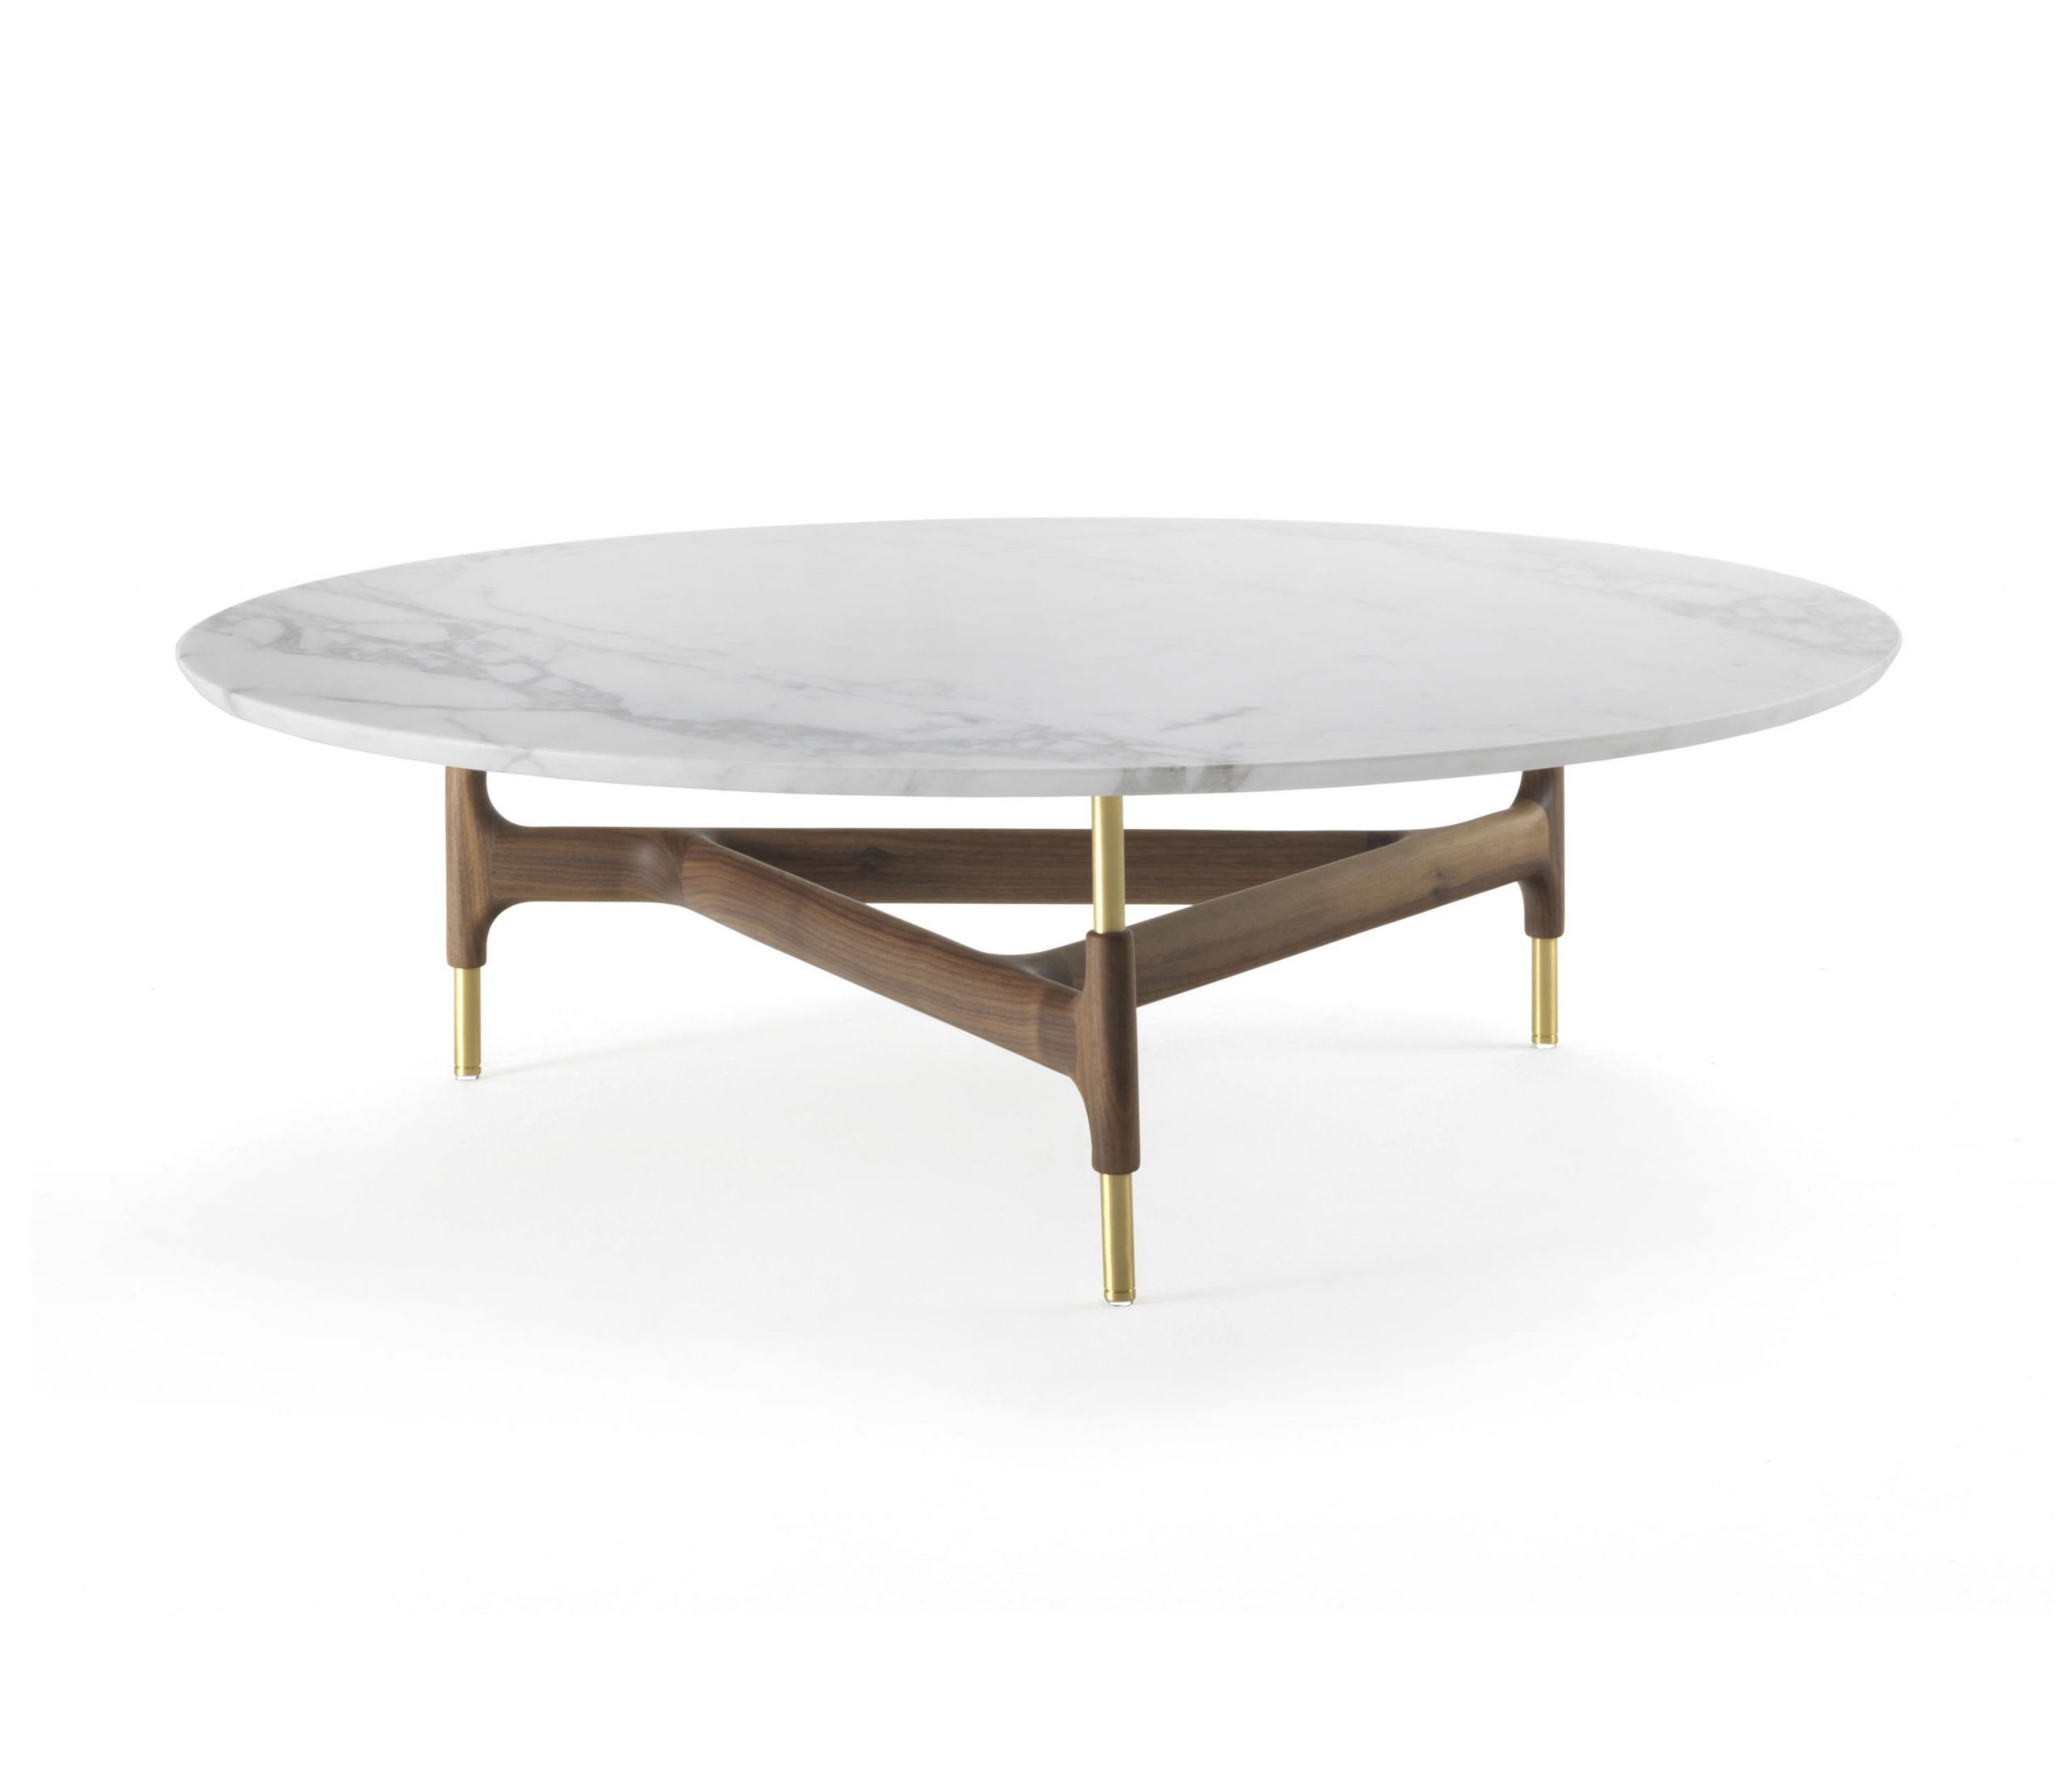 JOINT 55 - Side tables from Porada | Architonic